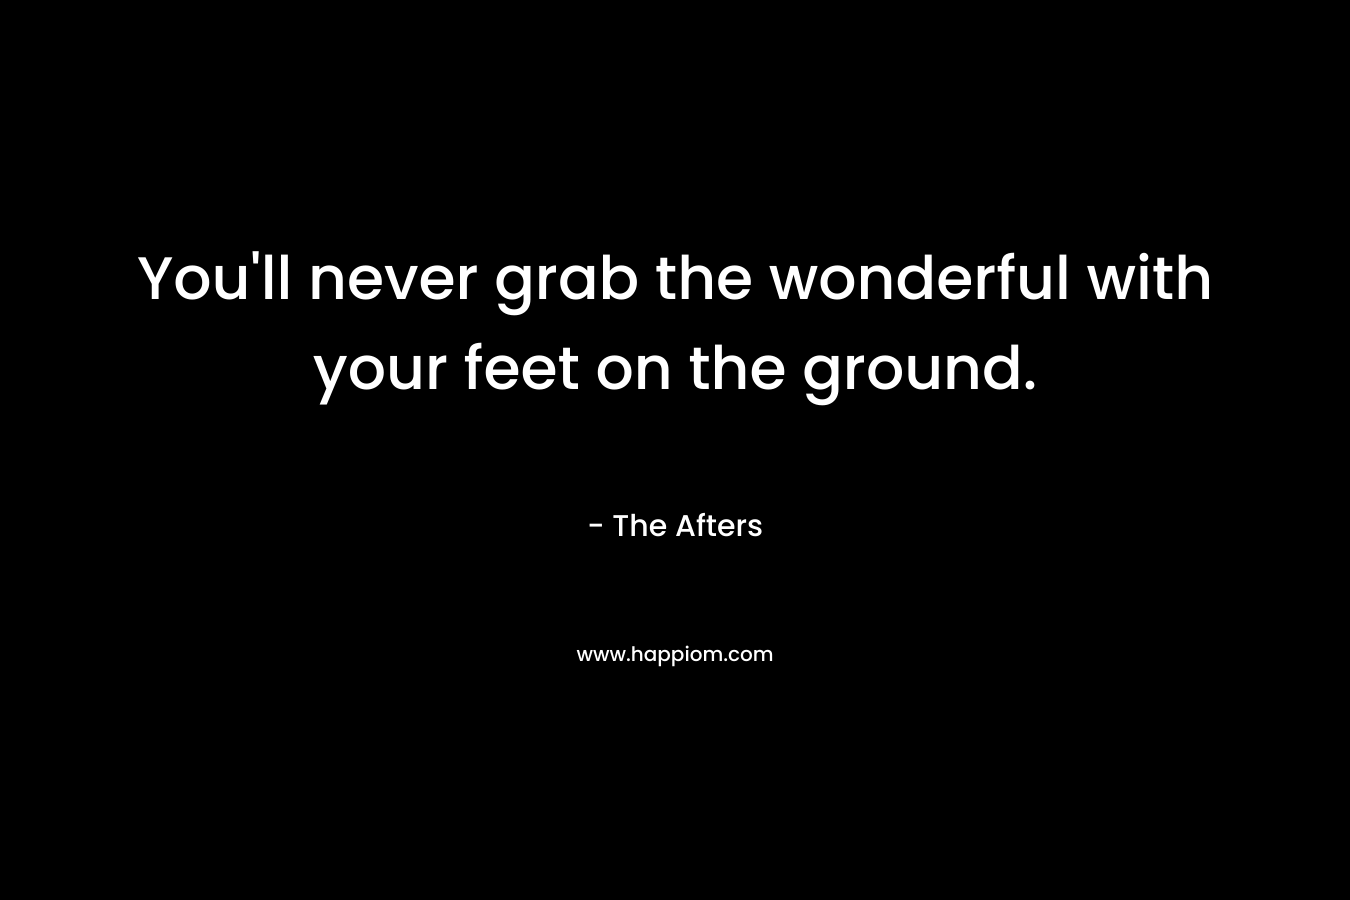 You’ll never grab the wonderful with your feet on the ground. – The Afters